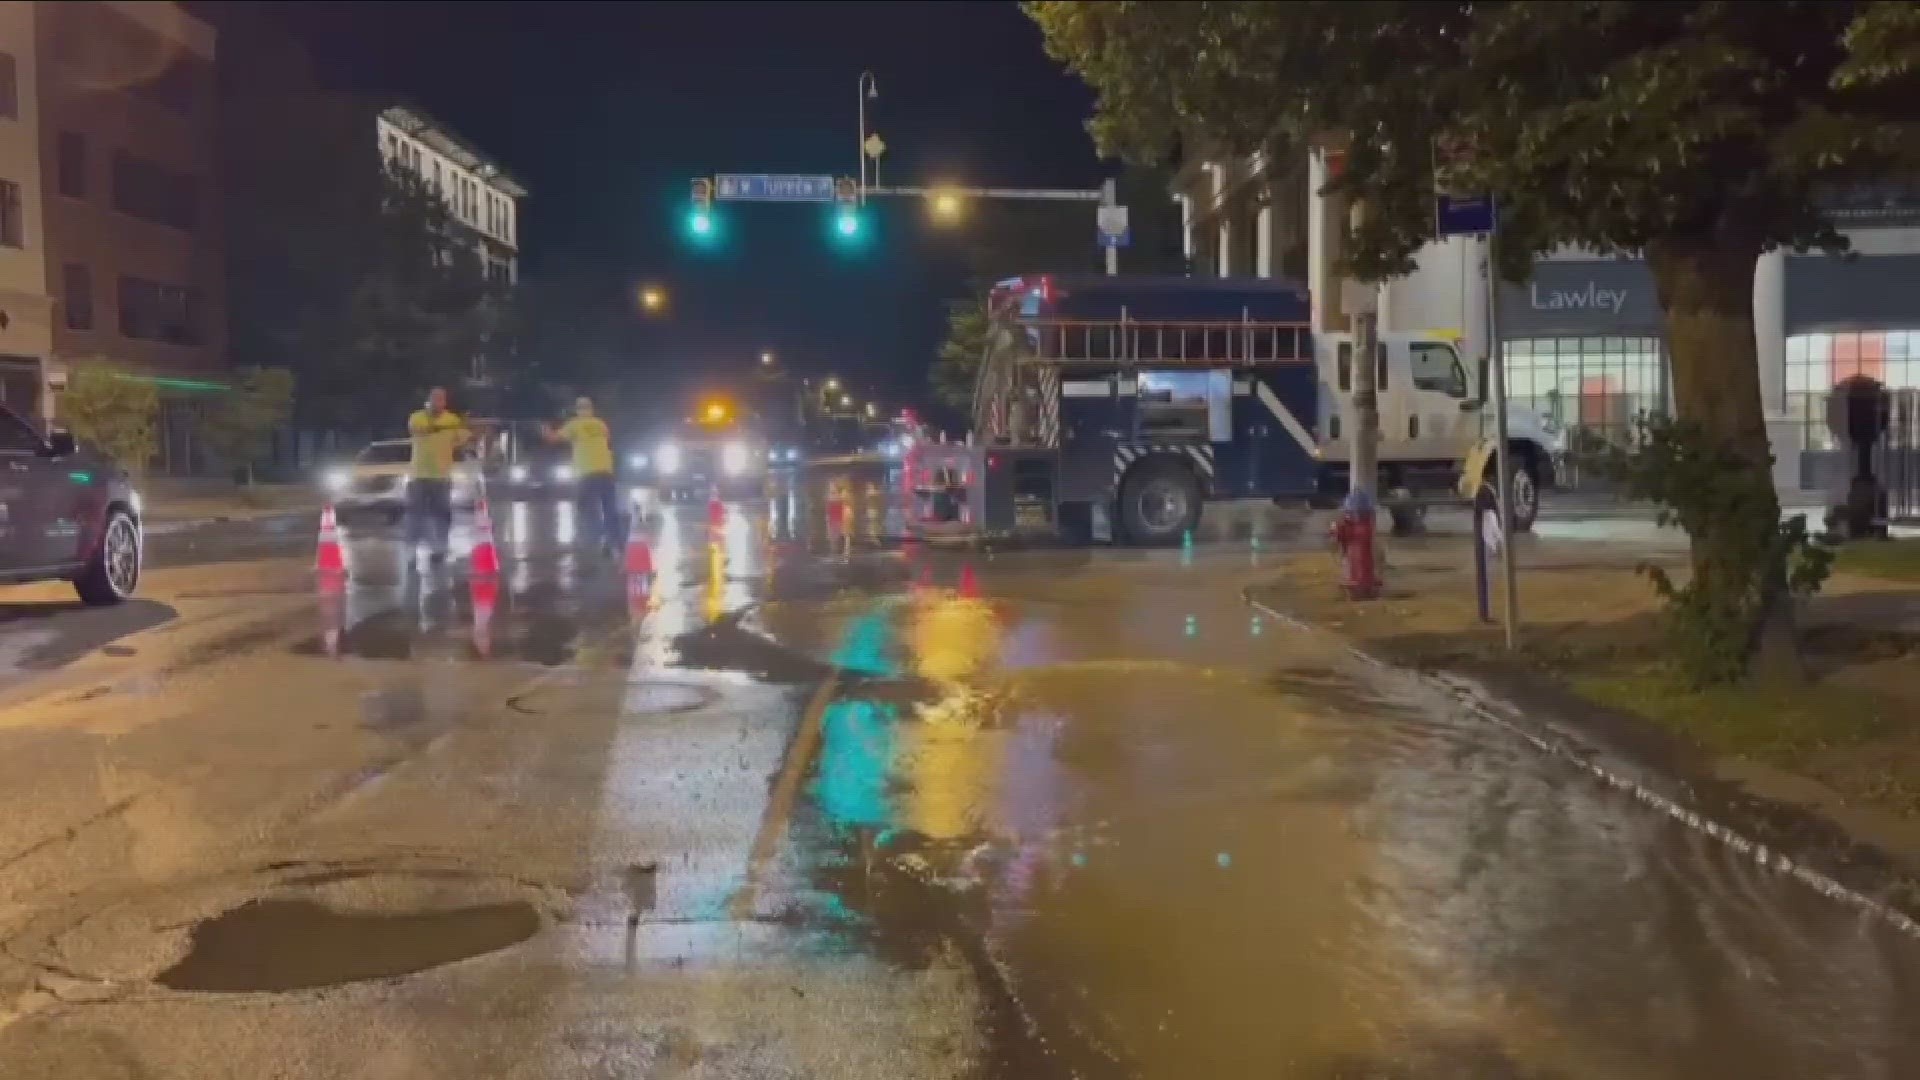 The water main break happened on Delaware Avenue, between Tupper and Edward streets, some time past 10 p.m. Friday.